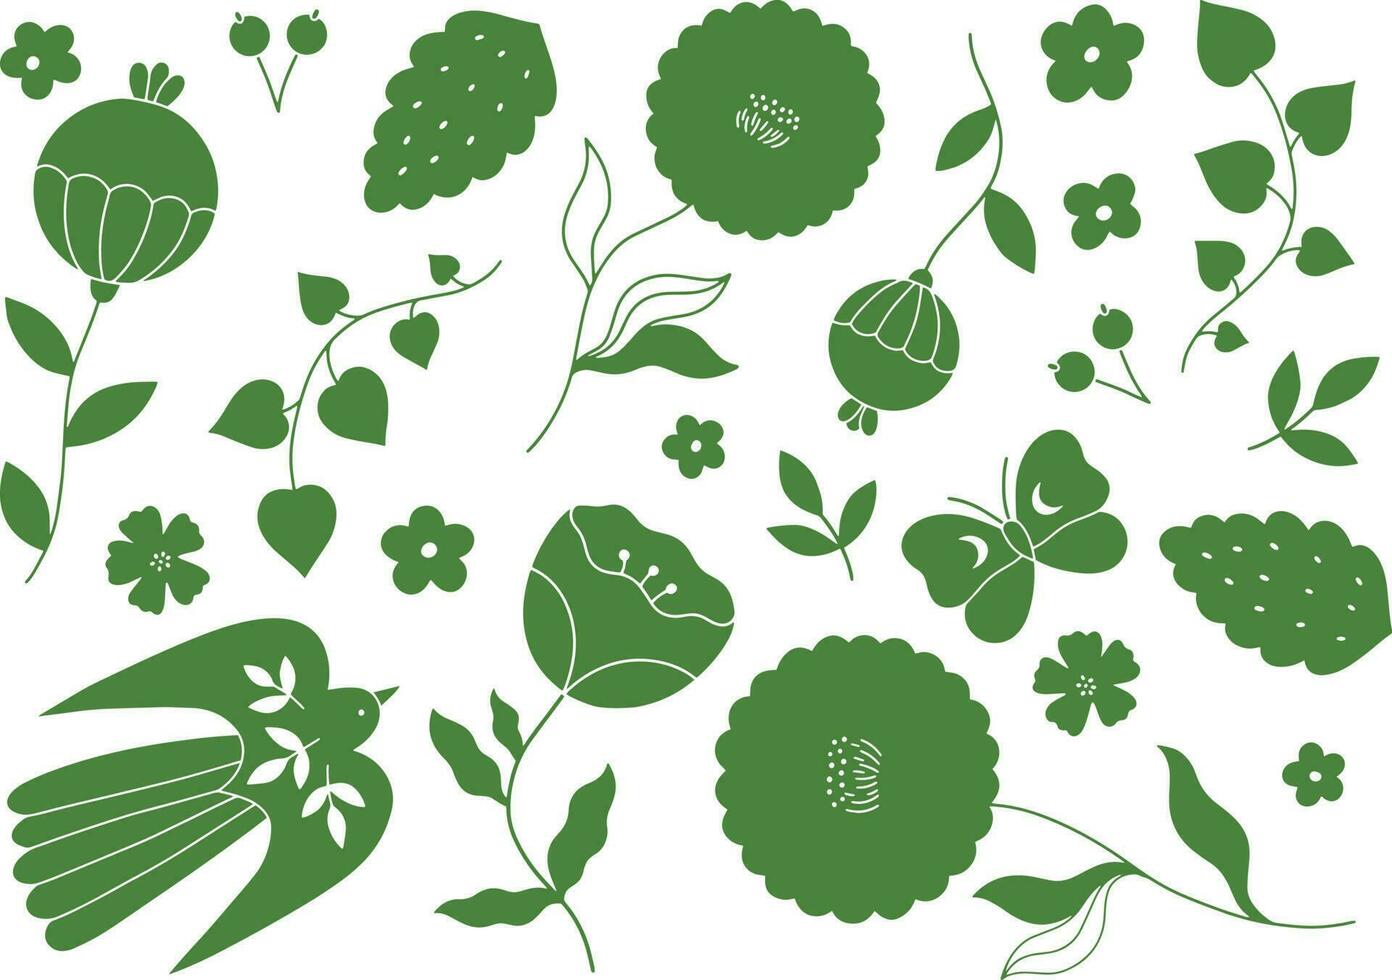 Set of hand drawn elements of flowers, leaves, birds and butterflies. Abstract silhouette flat style. Green vector illustration isolated on white background